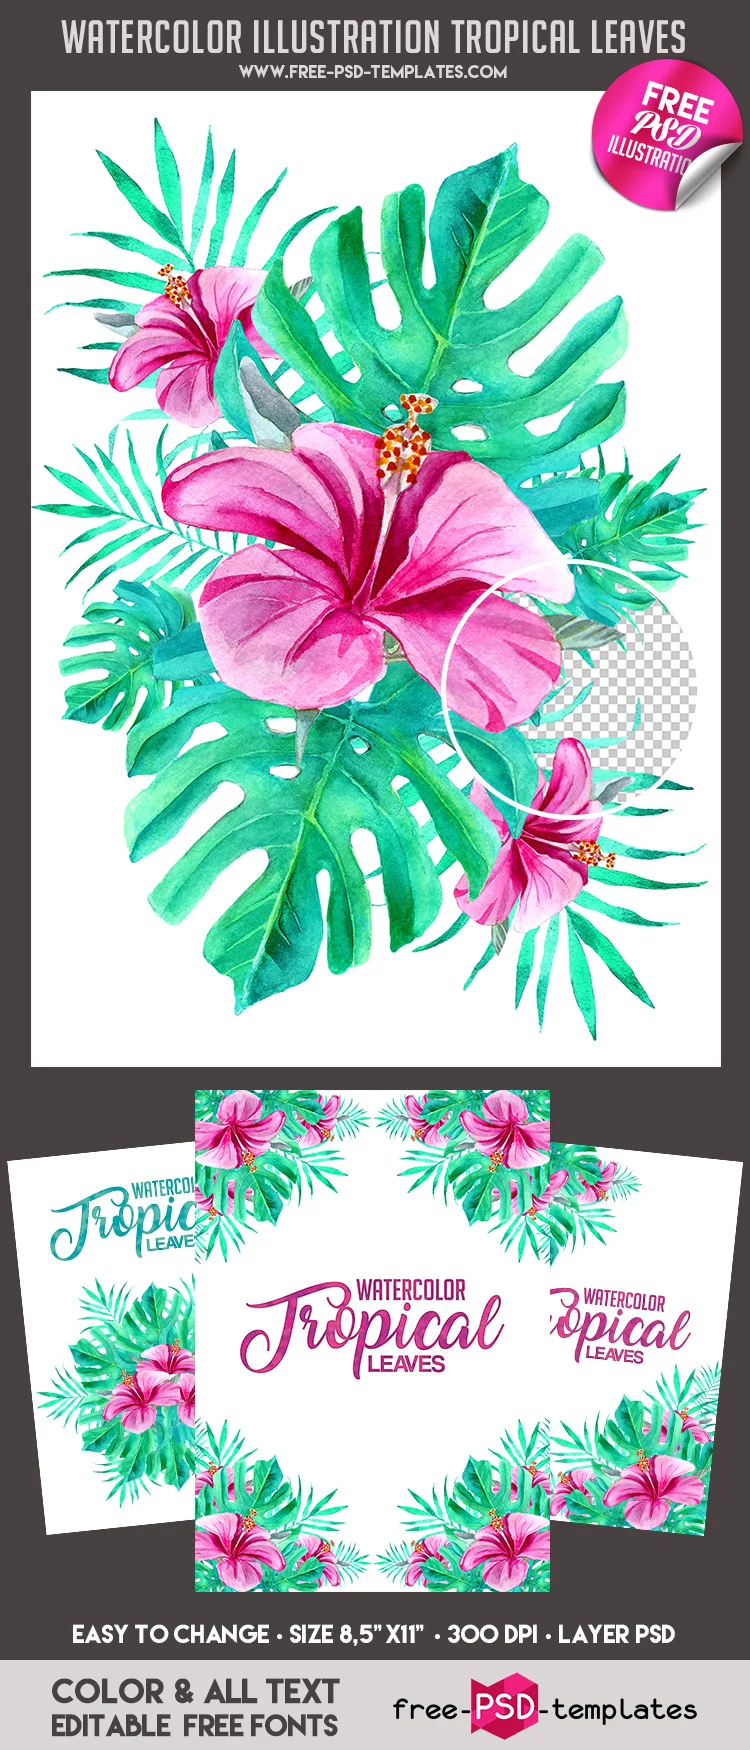 FREE Watercolor Tropical Leaves IN PSD